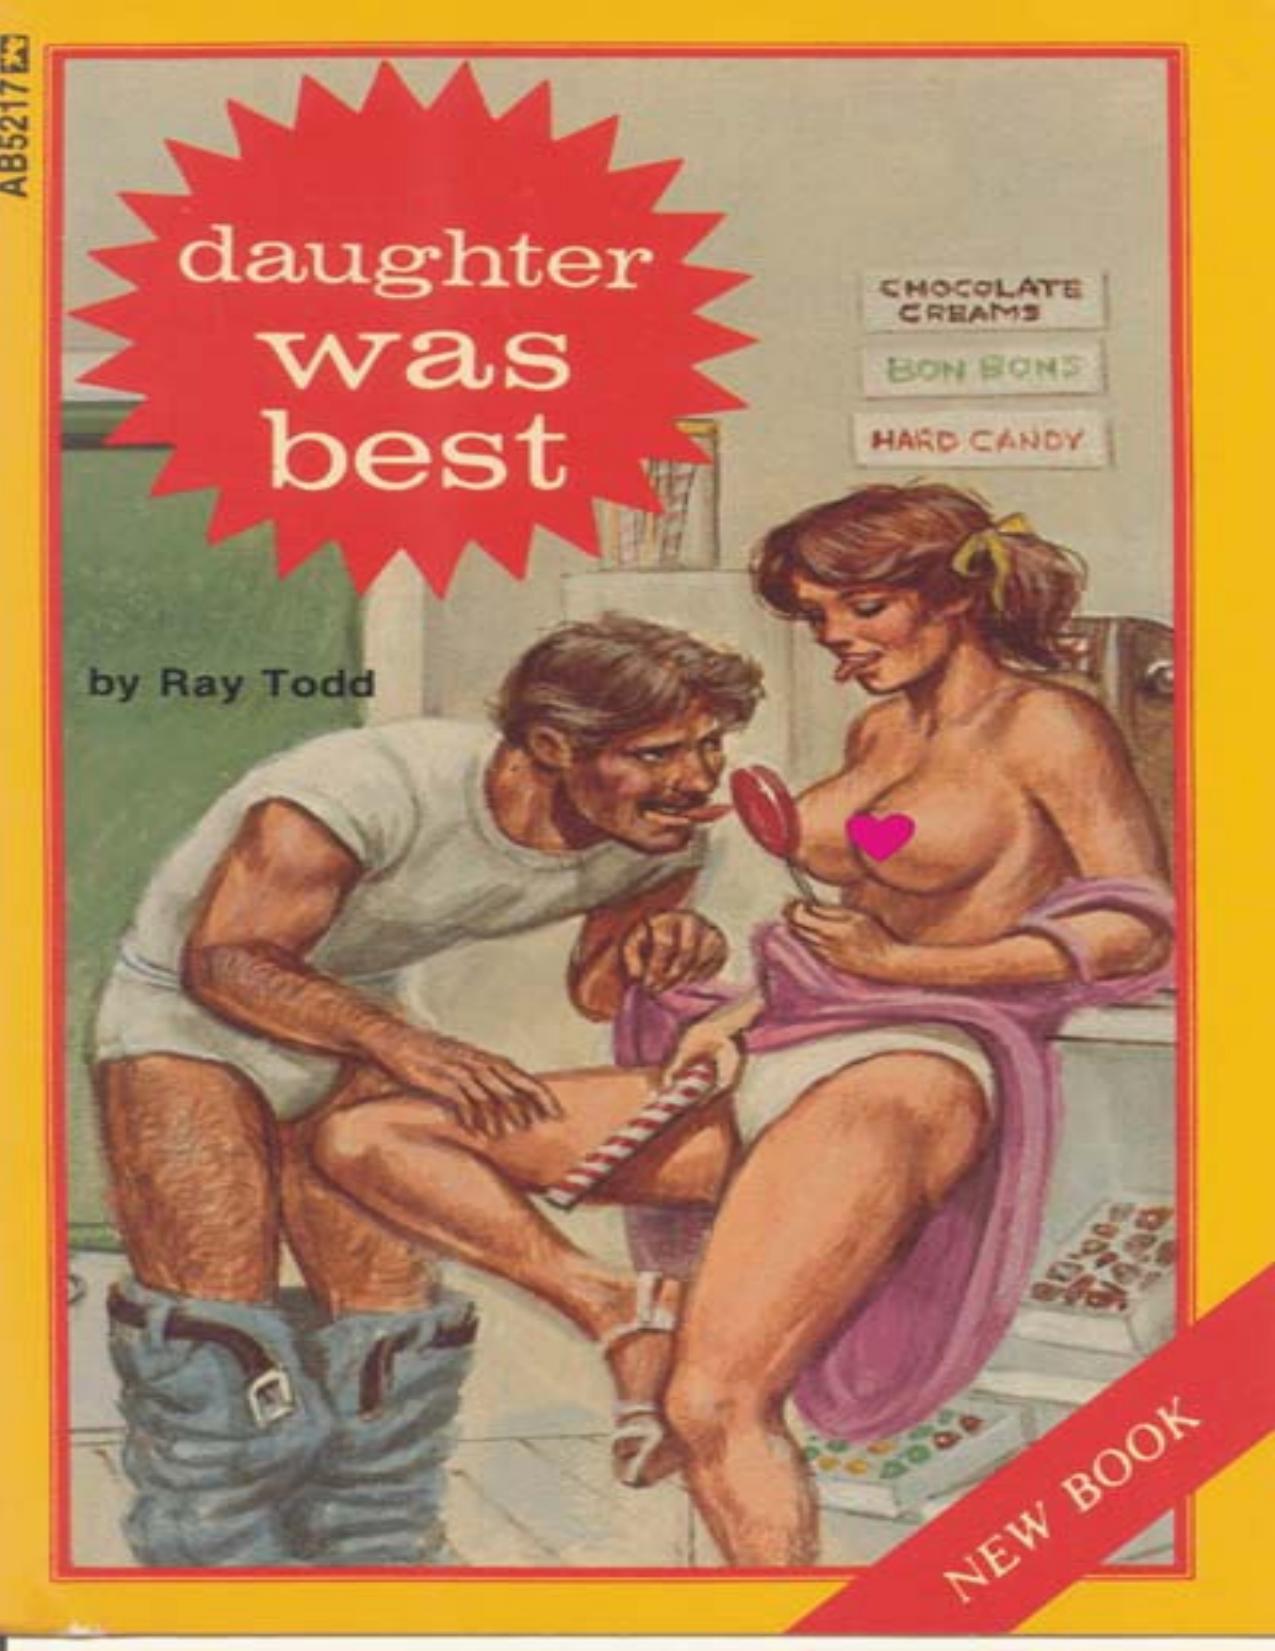 Daughter Was Best by Ray Todd